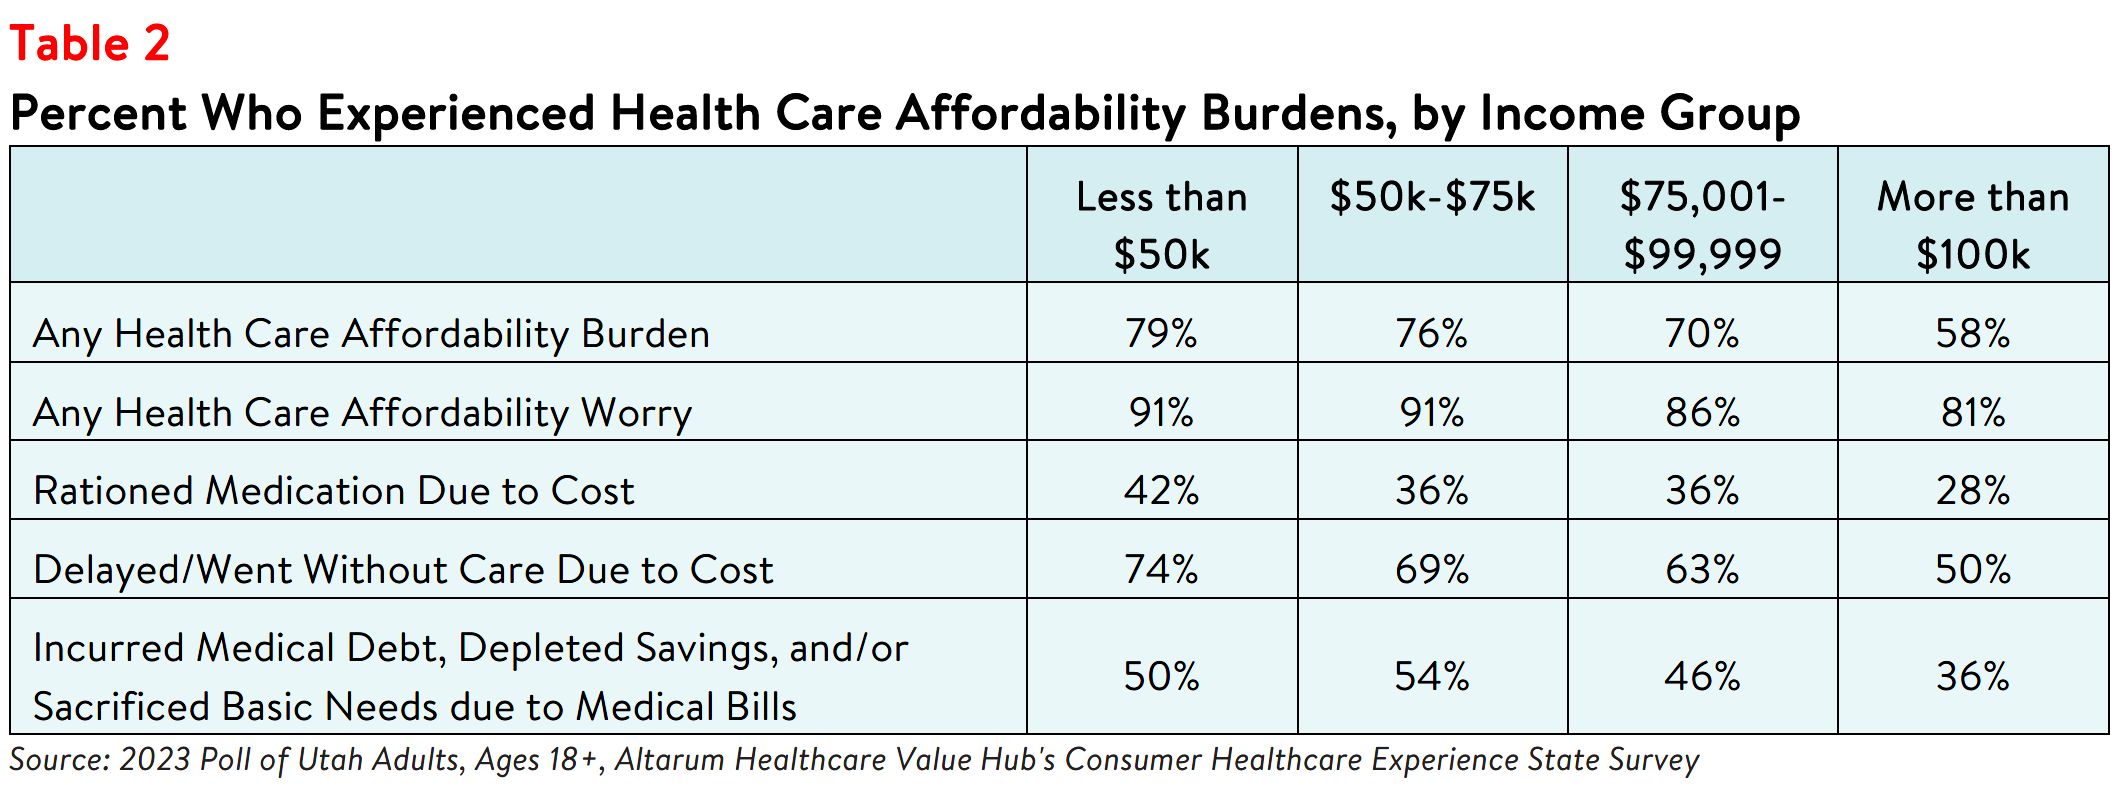 Utah Residents Bear Health Care Affordability Burdens Unequally_Table2.png